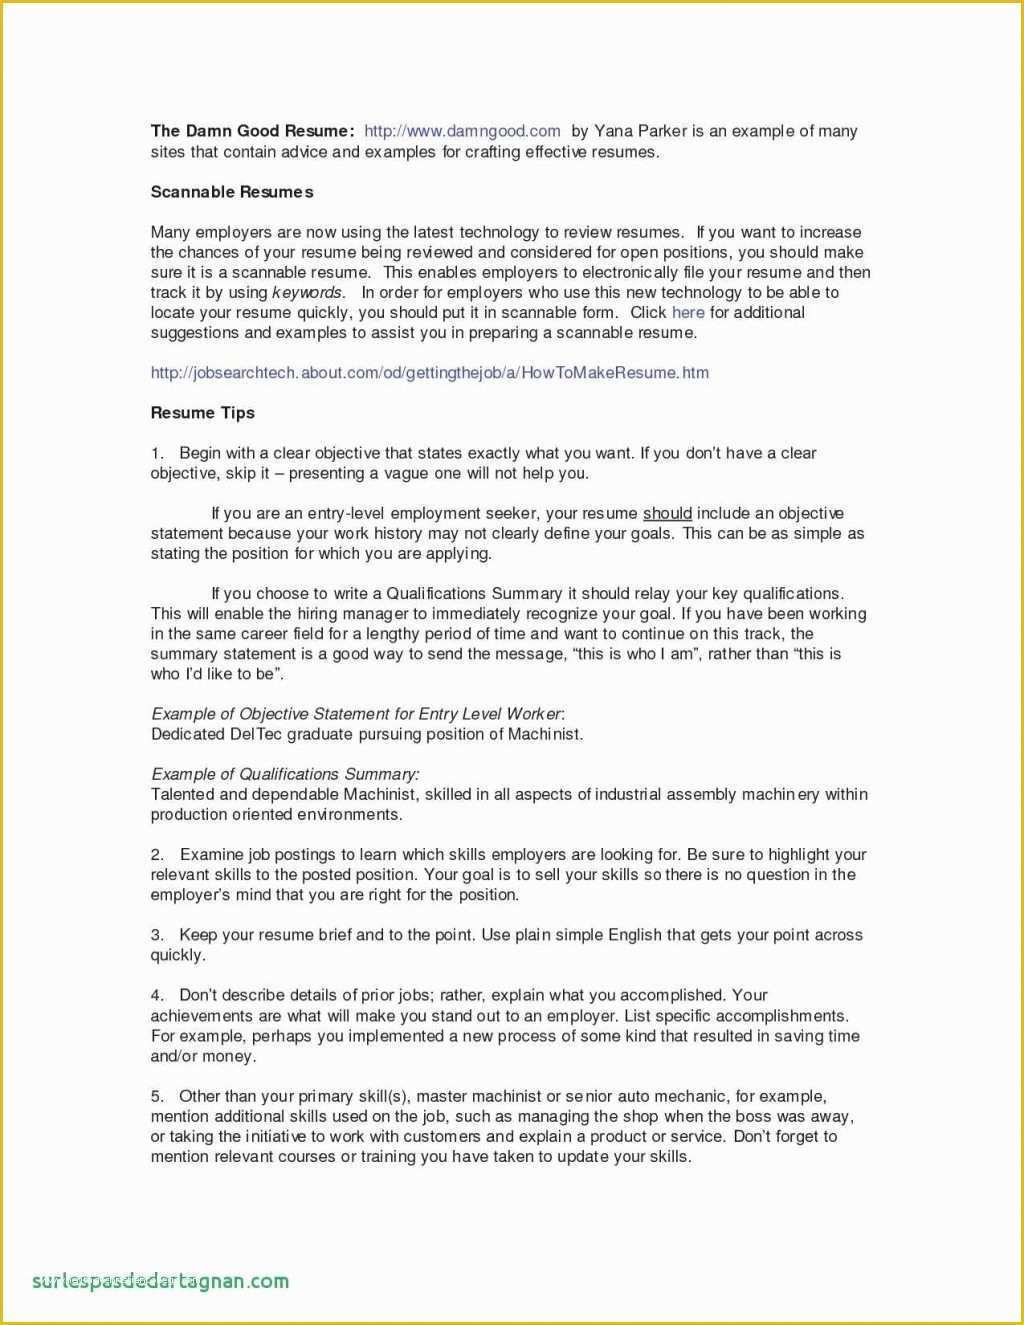 Free Resume Templates Pdf Of Resume and Template 40 Resume Builder Free Download Pdf